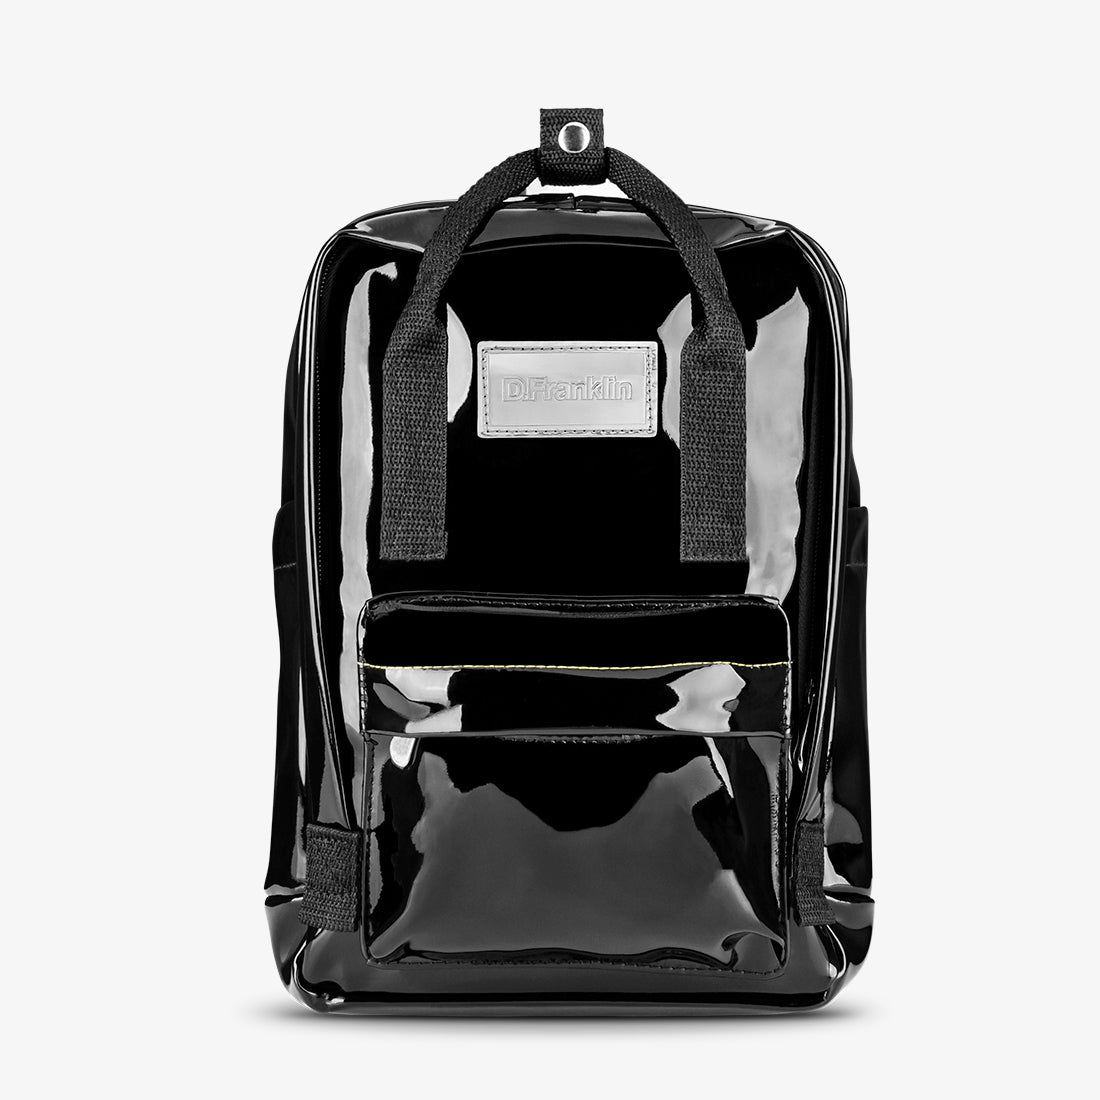 Abby Backpack Patent Black